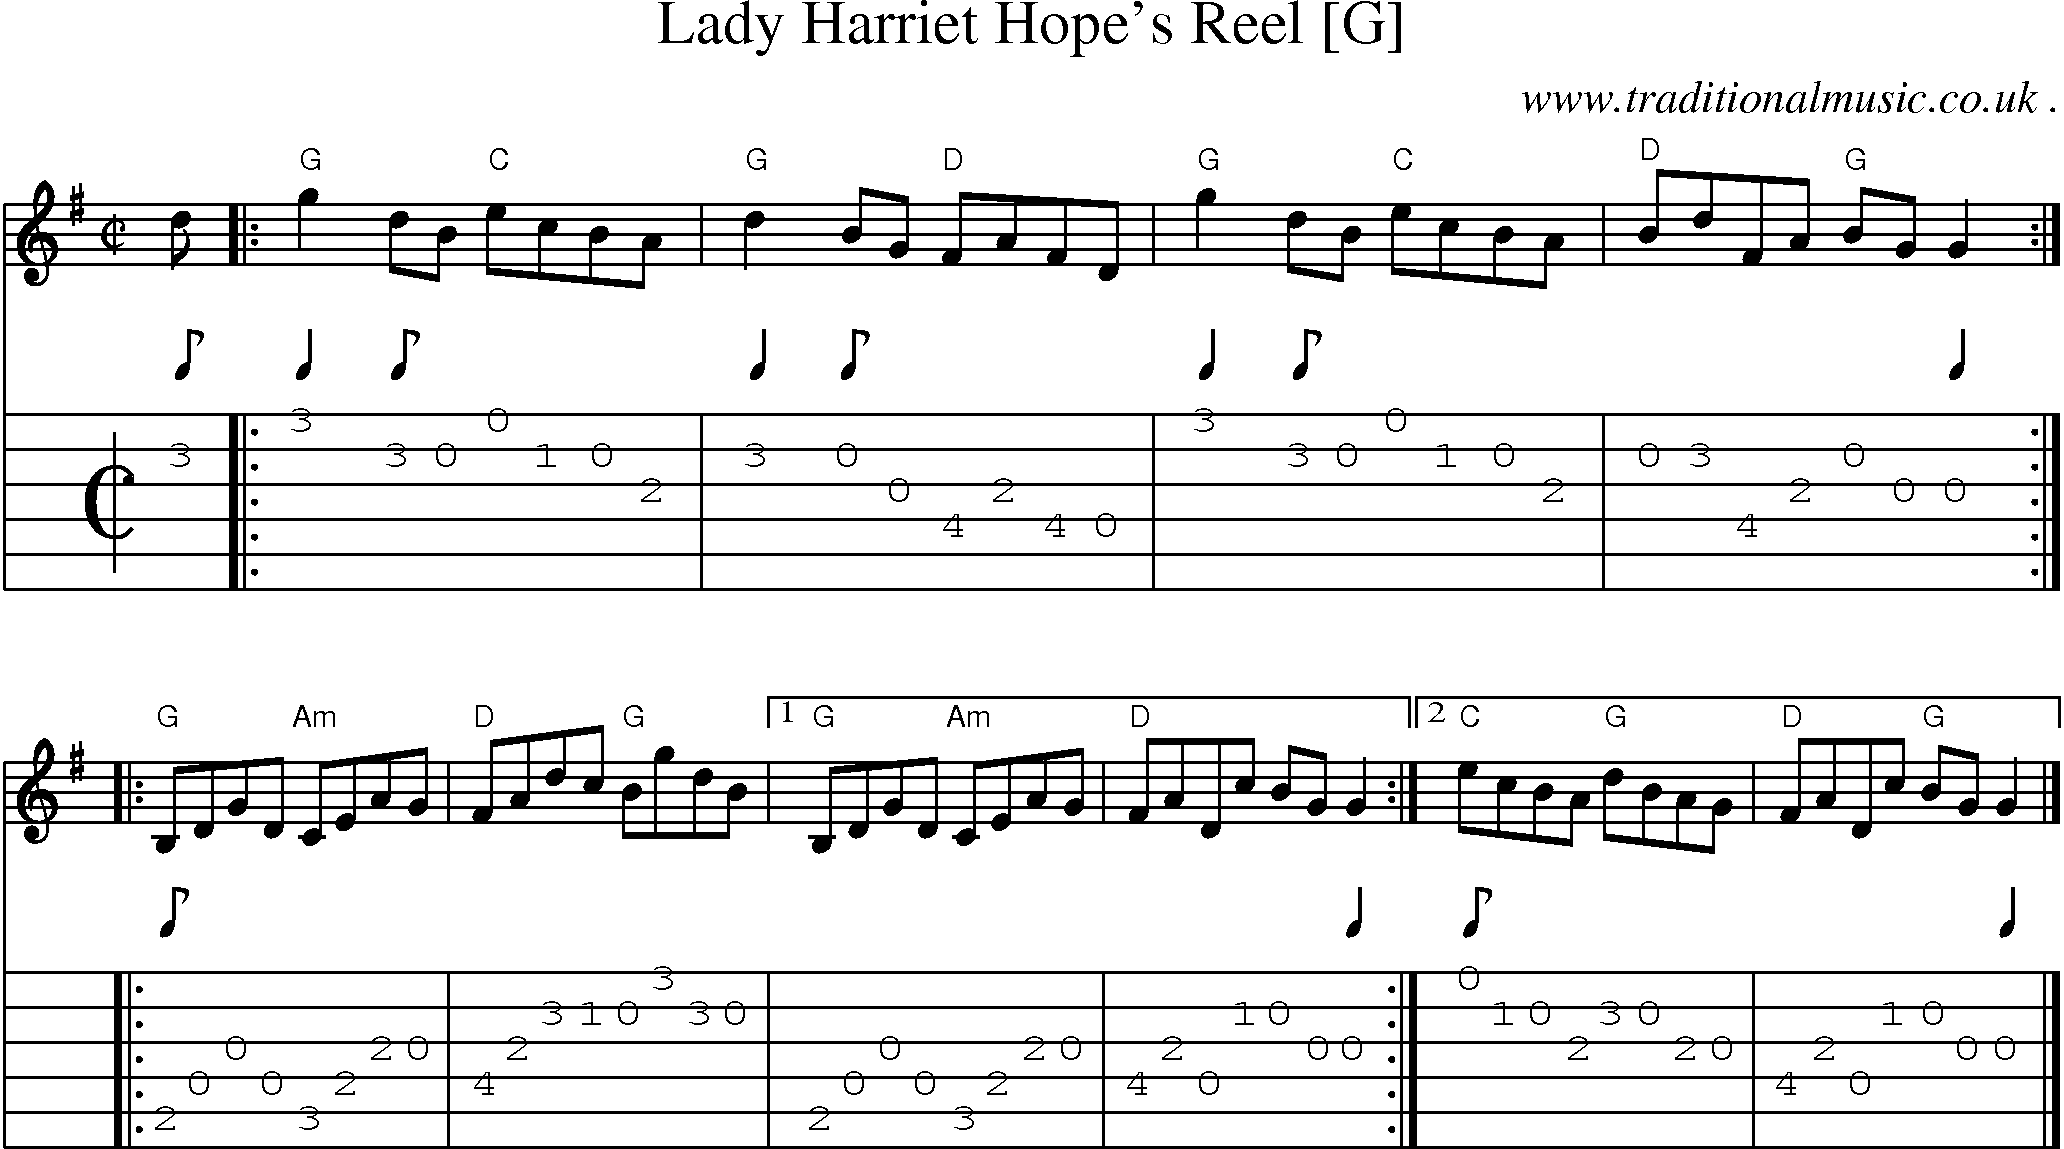 Sheet-music  score, Chords and Guitar Tabs for Lady Harriet Hopes Reel [g]